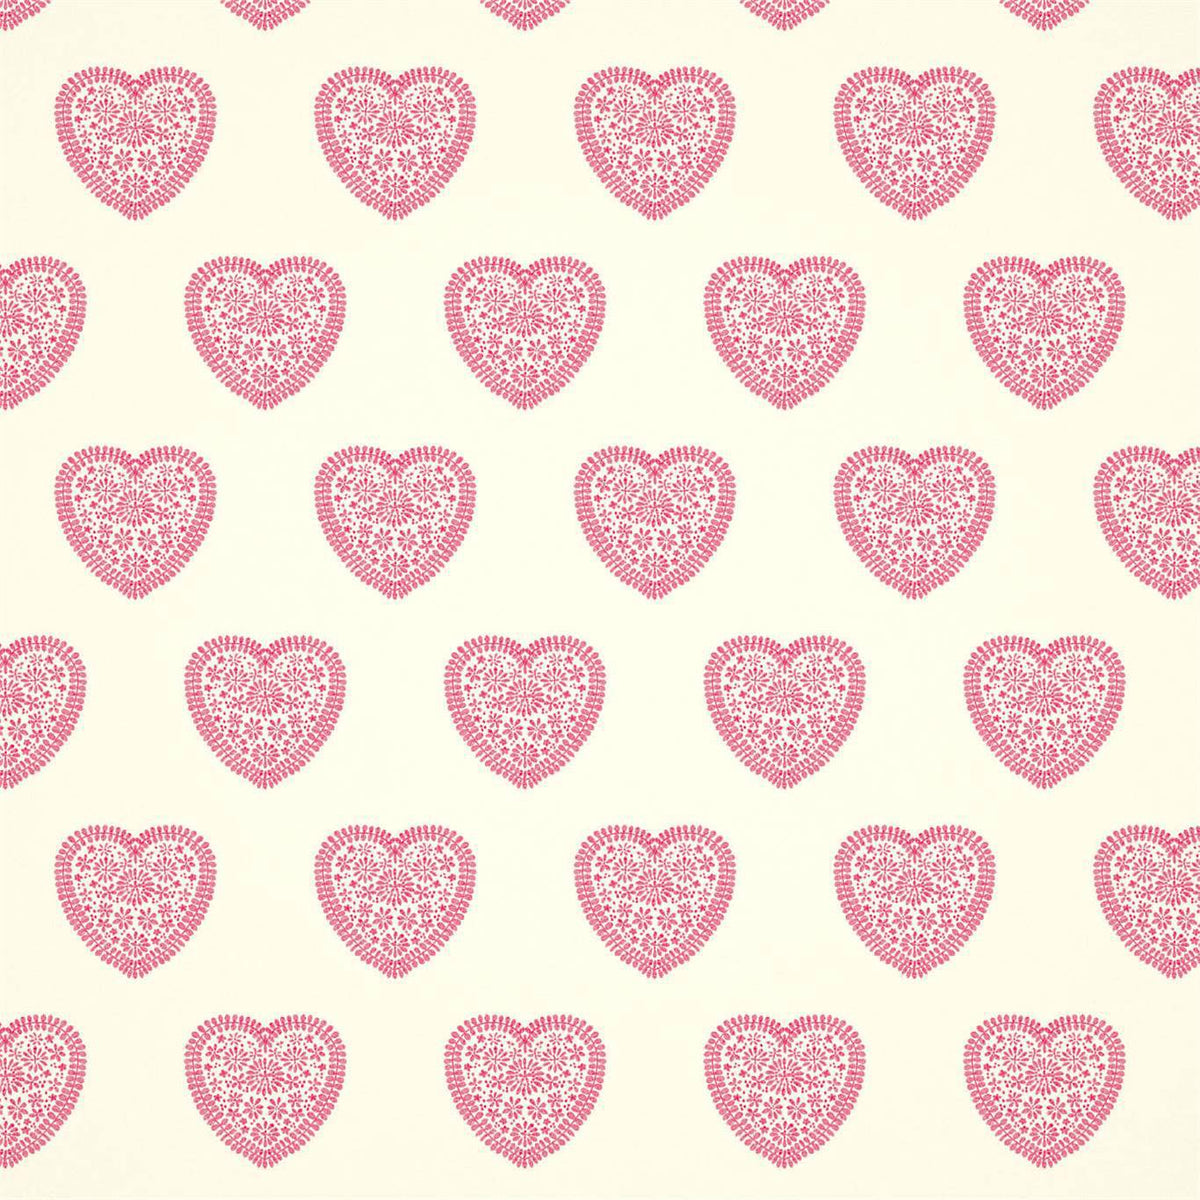 Sweet Hearts - Pink